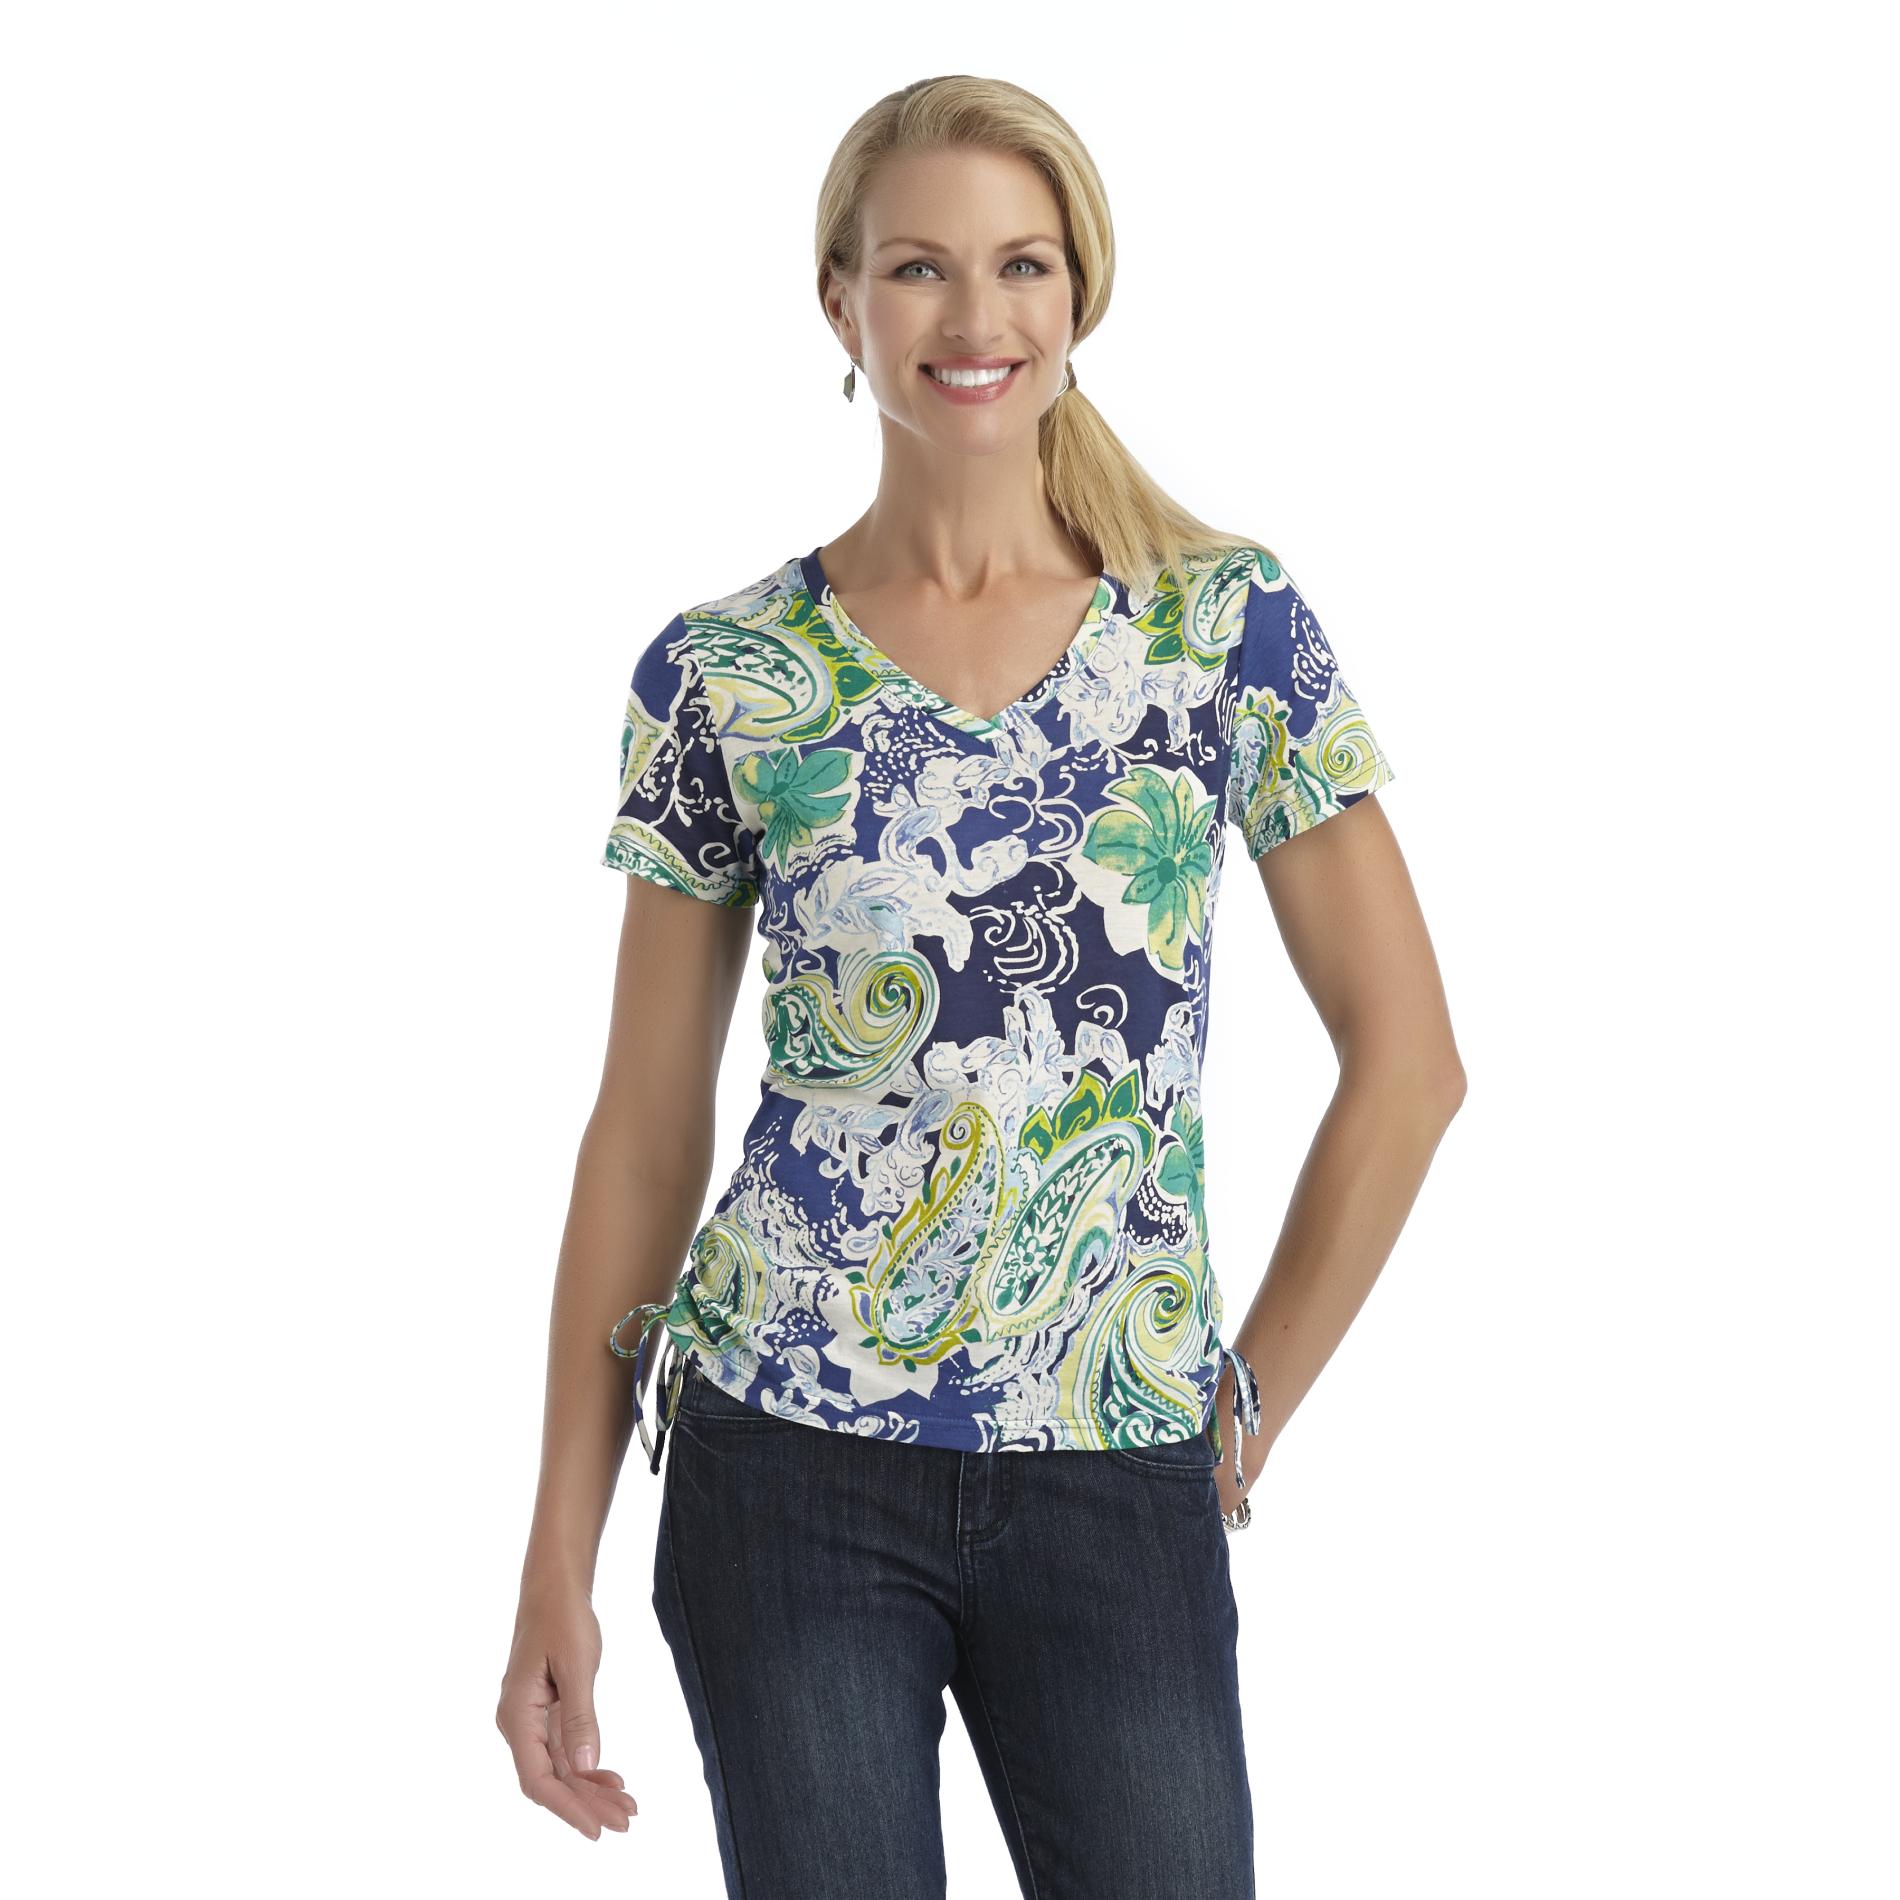 Basic Editions Women's Short-Sleeve Top - Floral Print